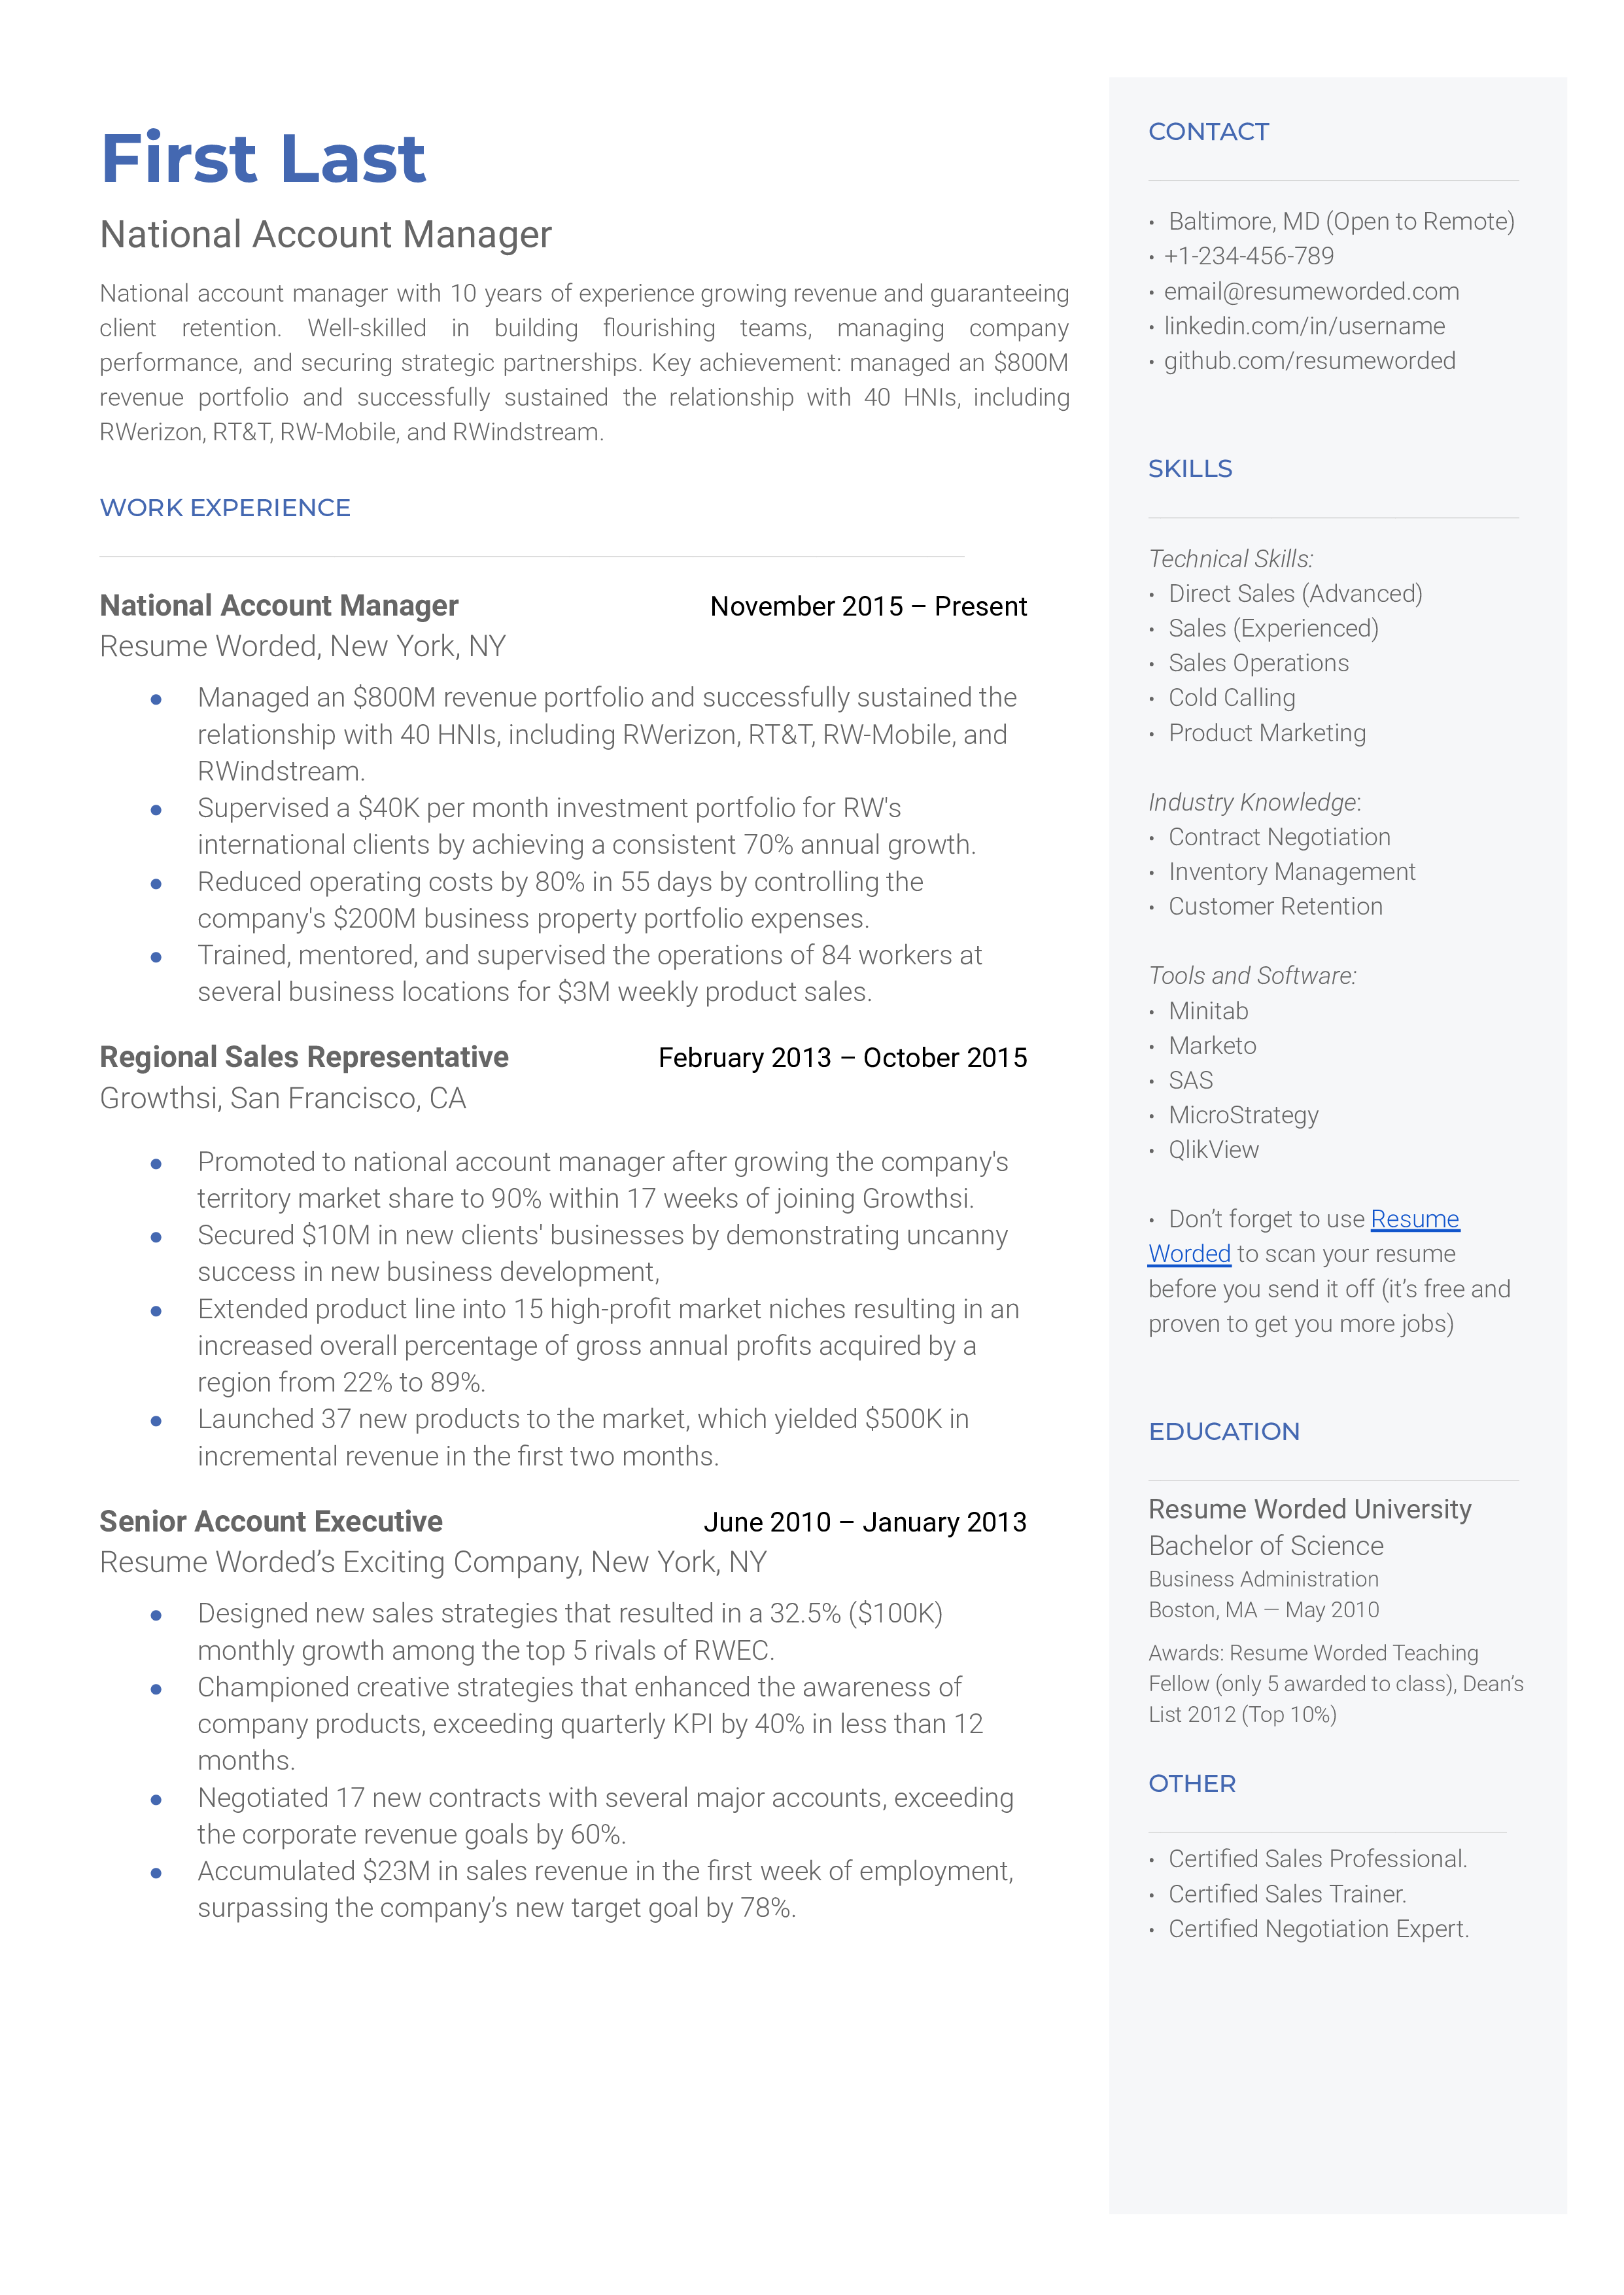 National Account Manager Resume Sample